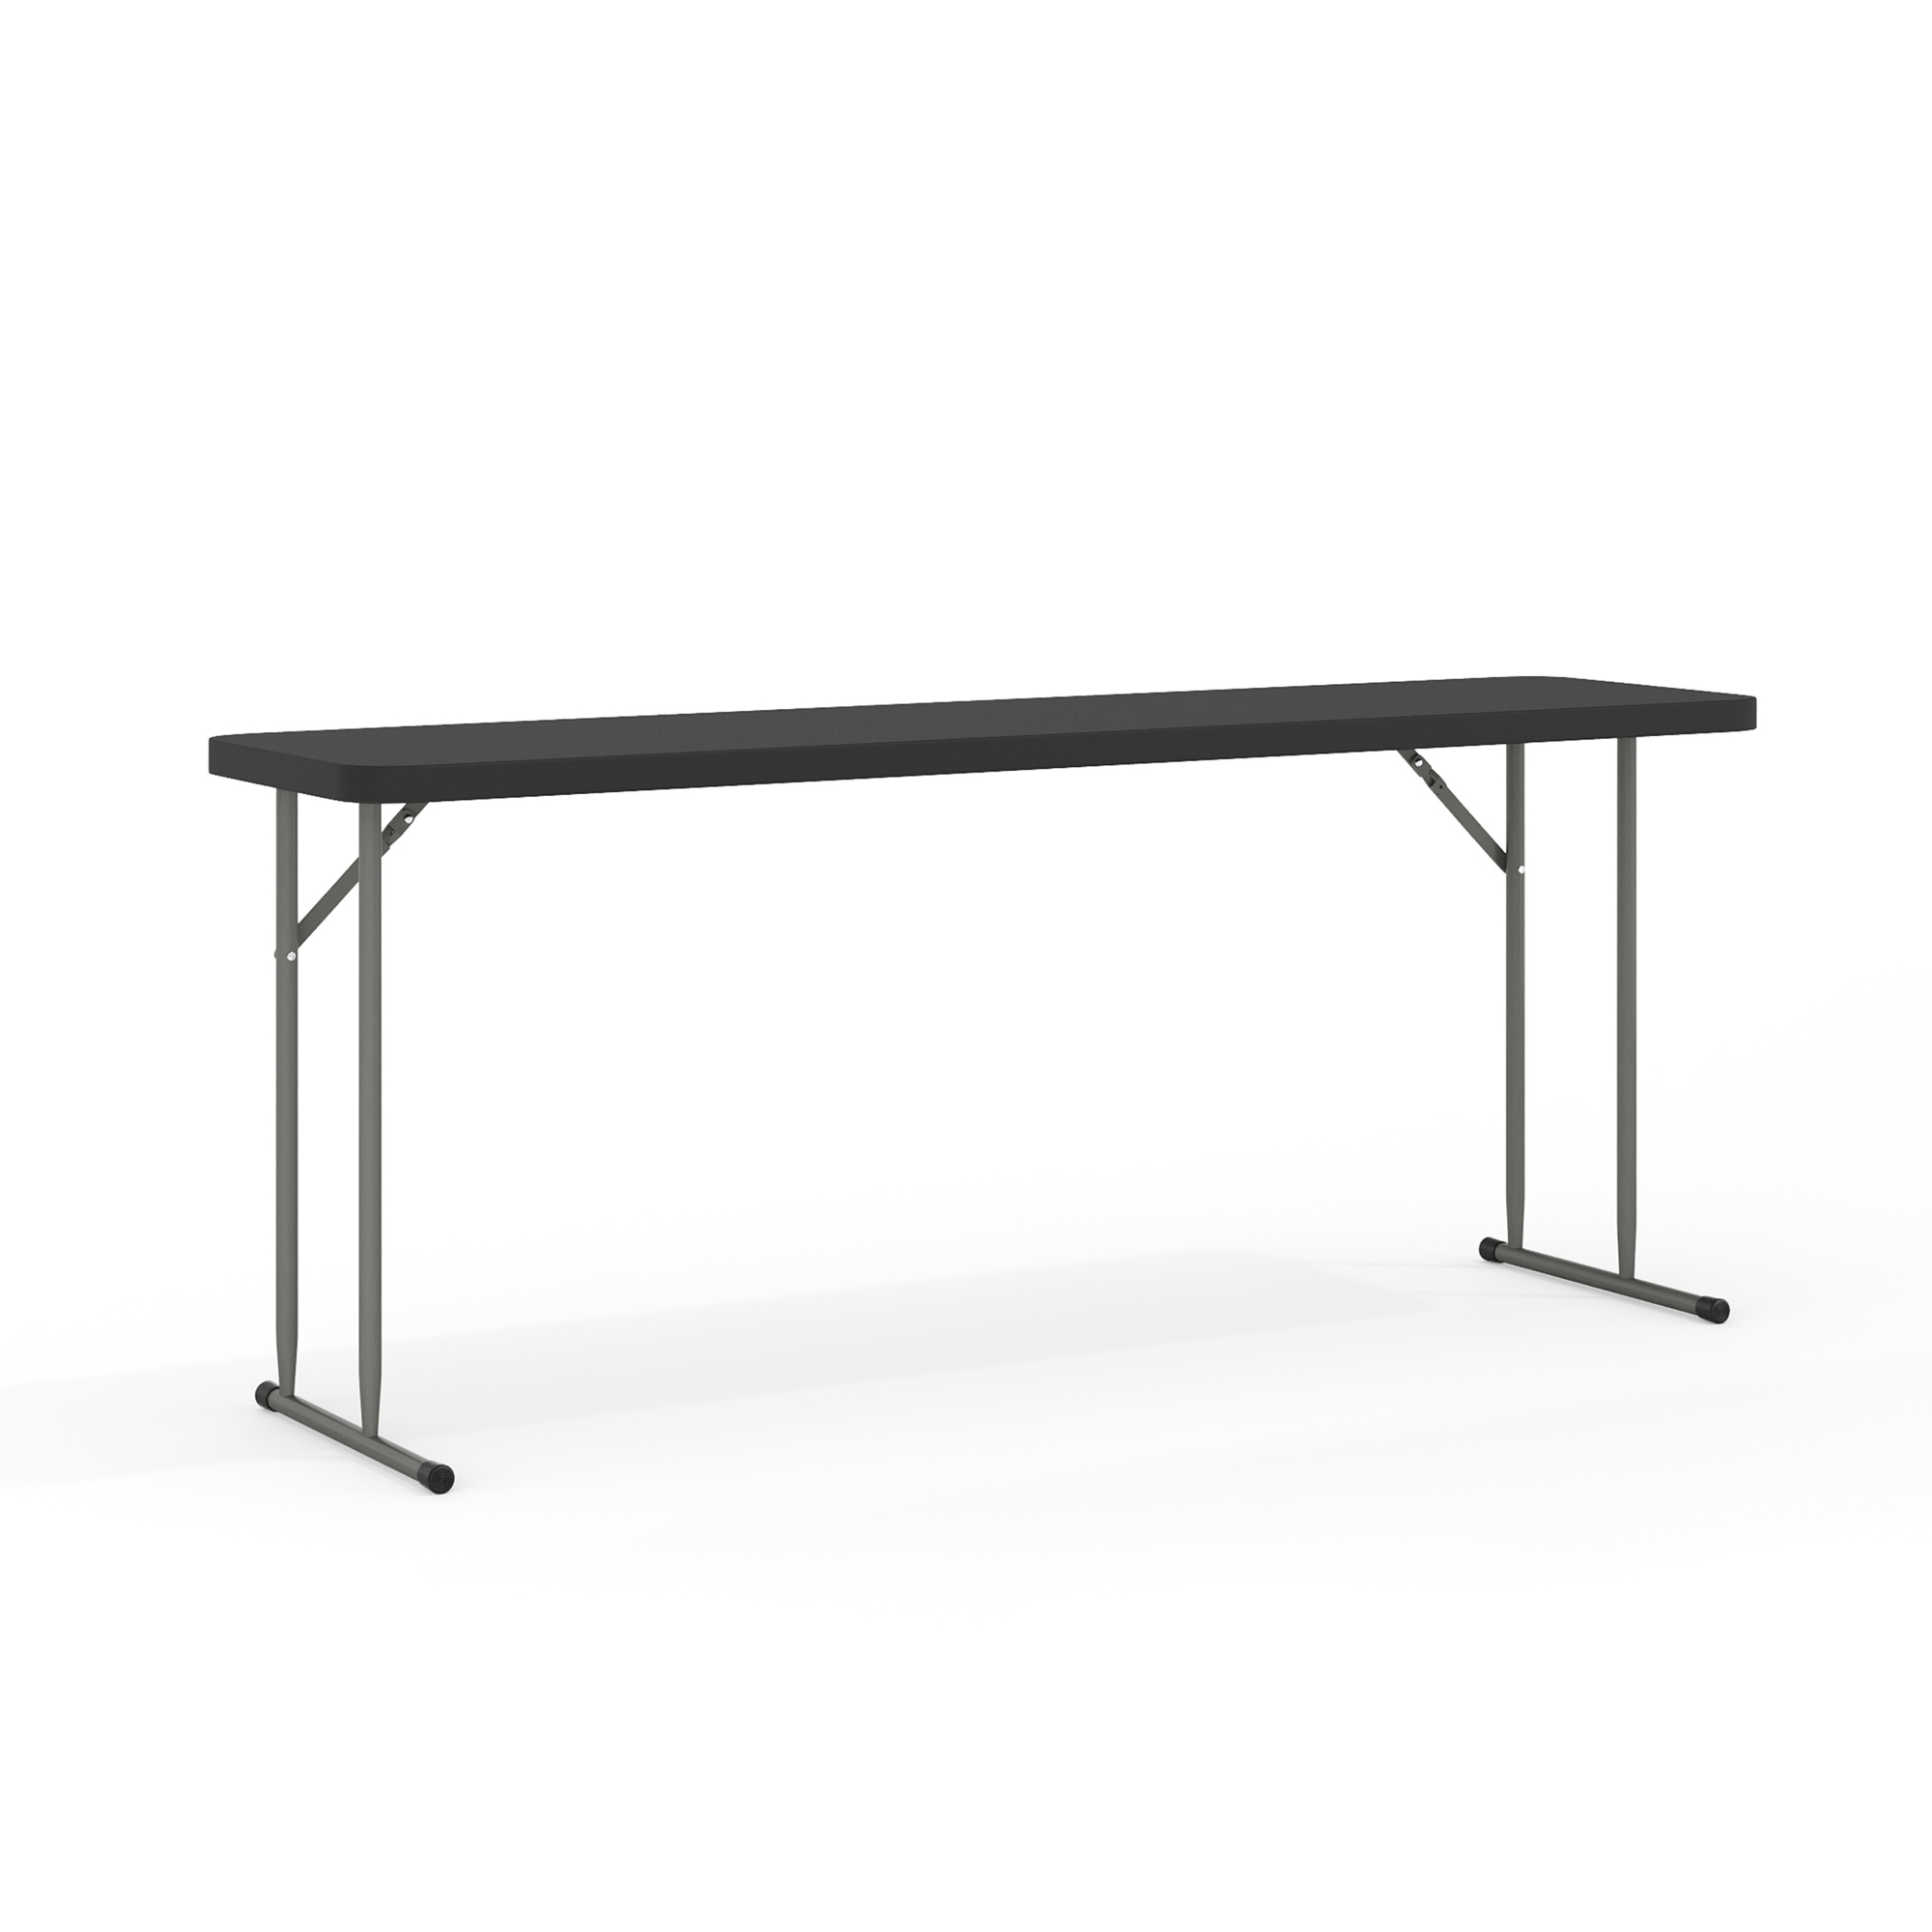 Flash Furniture, 6ft. Black Plastic Folding Training Table, Height 29 in, Width 18 in, Length 70.8 in, Model RB1872BK